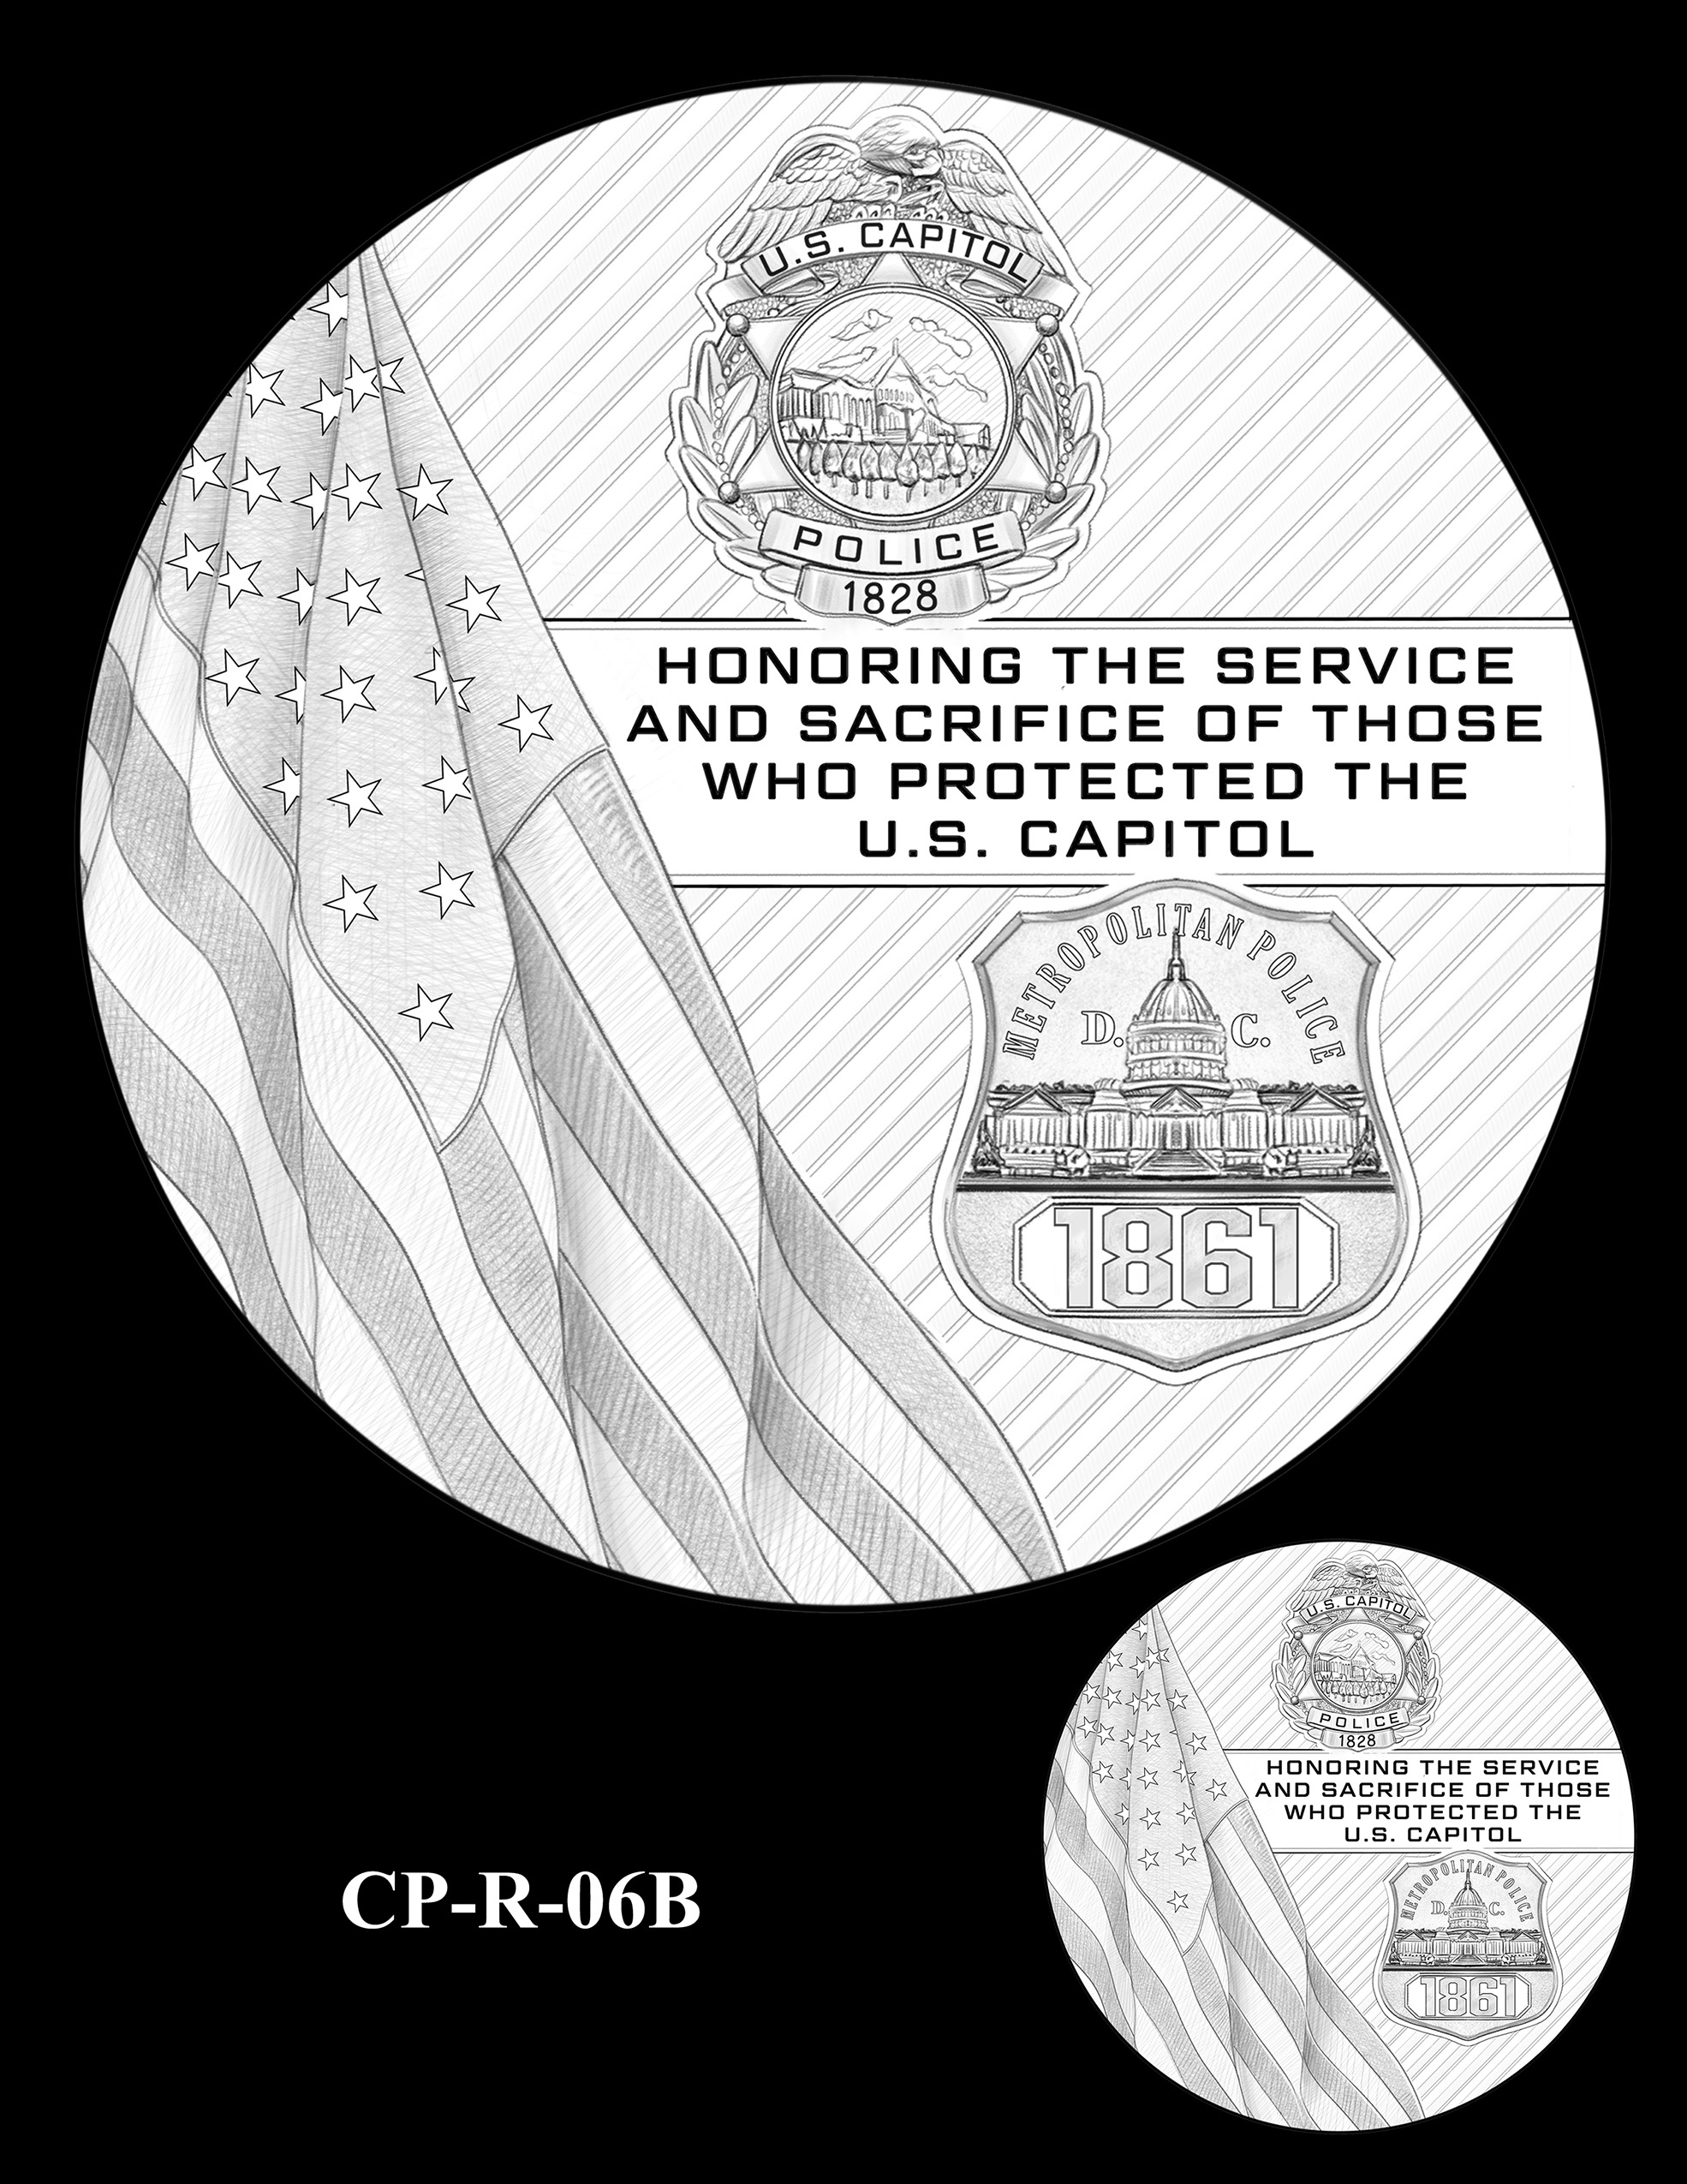 CP-R-06B -- Congressional Gold Medal for Those Who Protected the U.S. Capitol on January 6th 2021